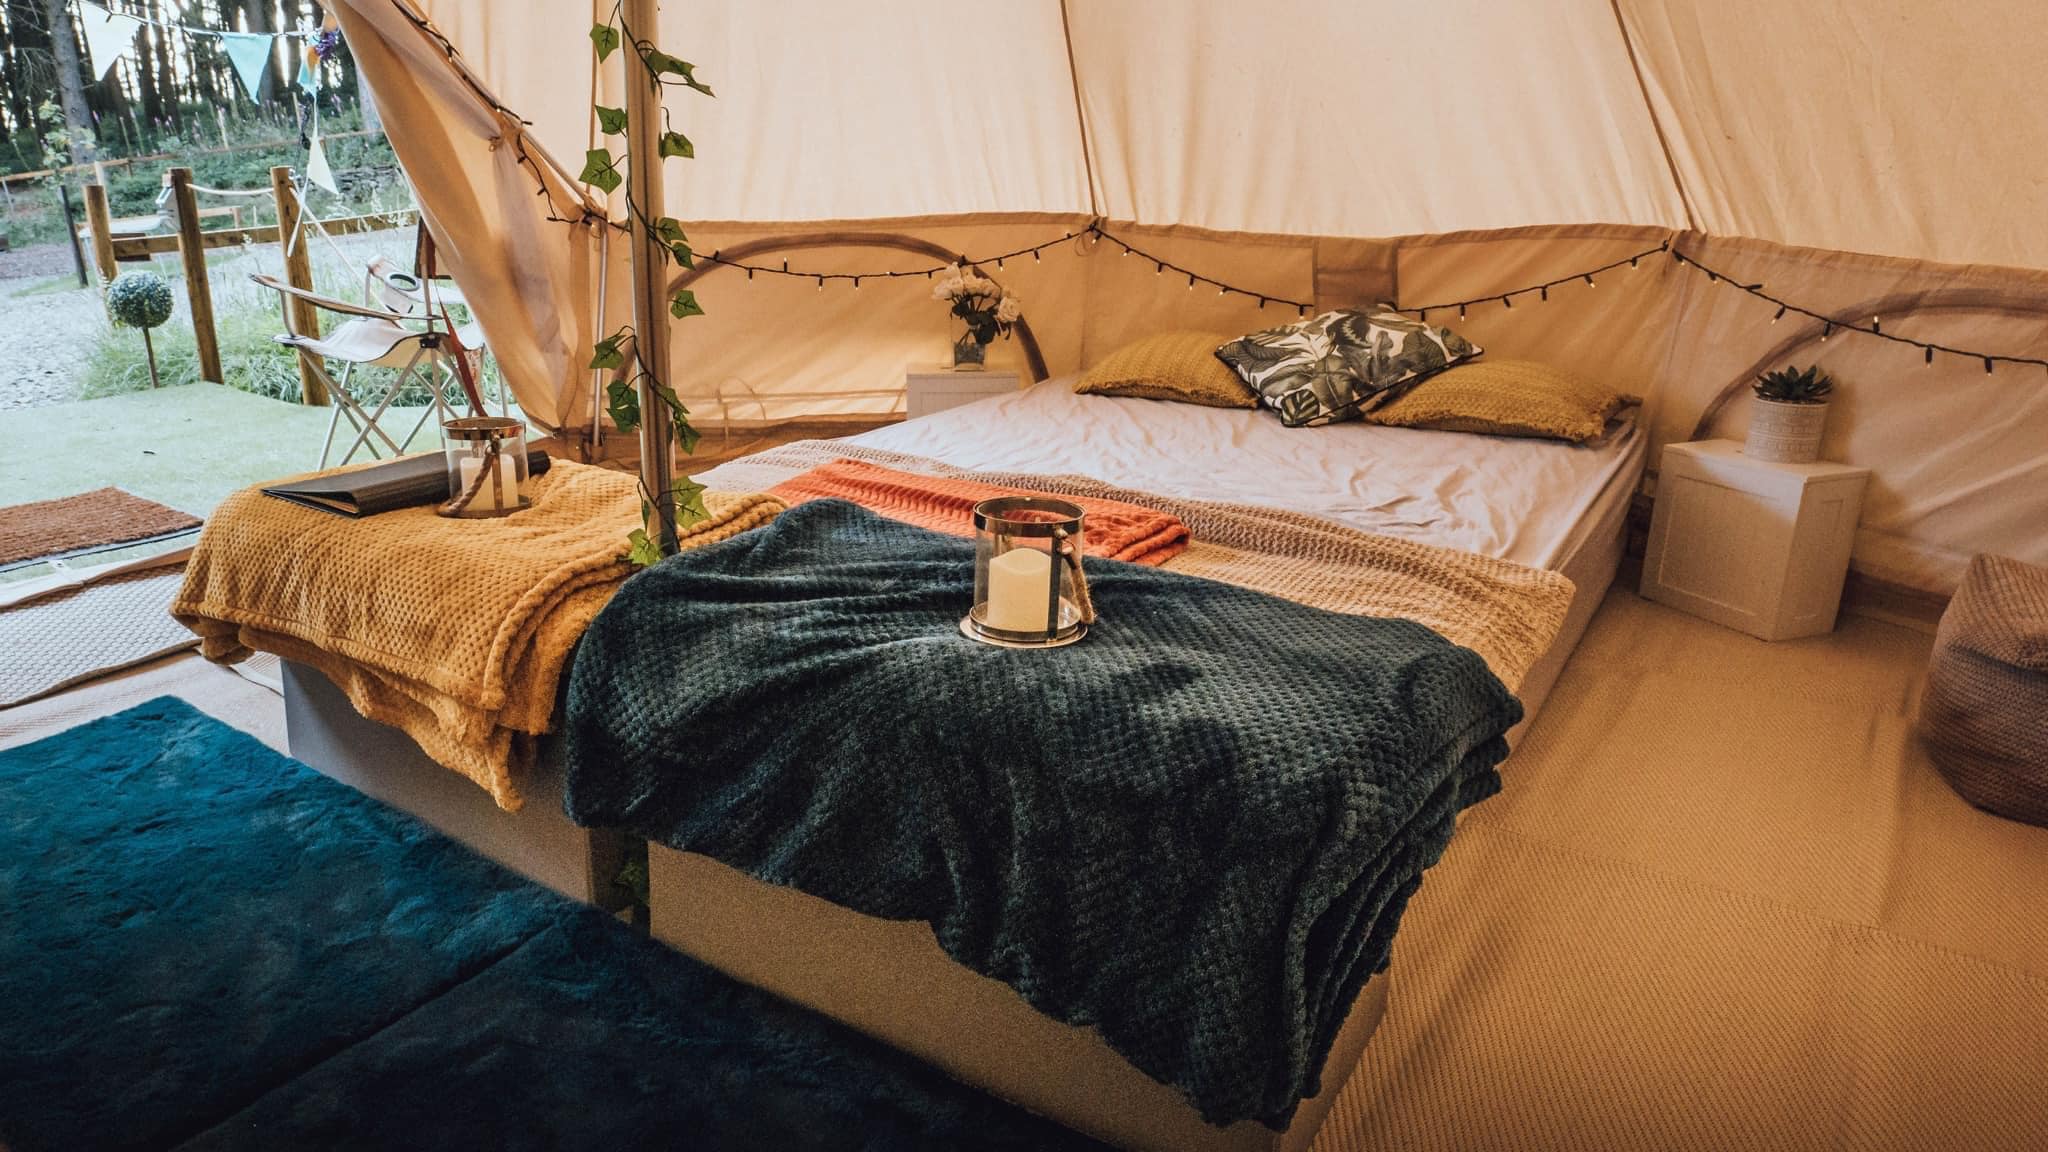 dearden-wood-teepee-glamping-tent-bed